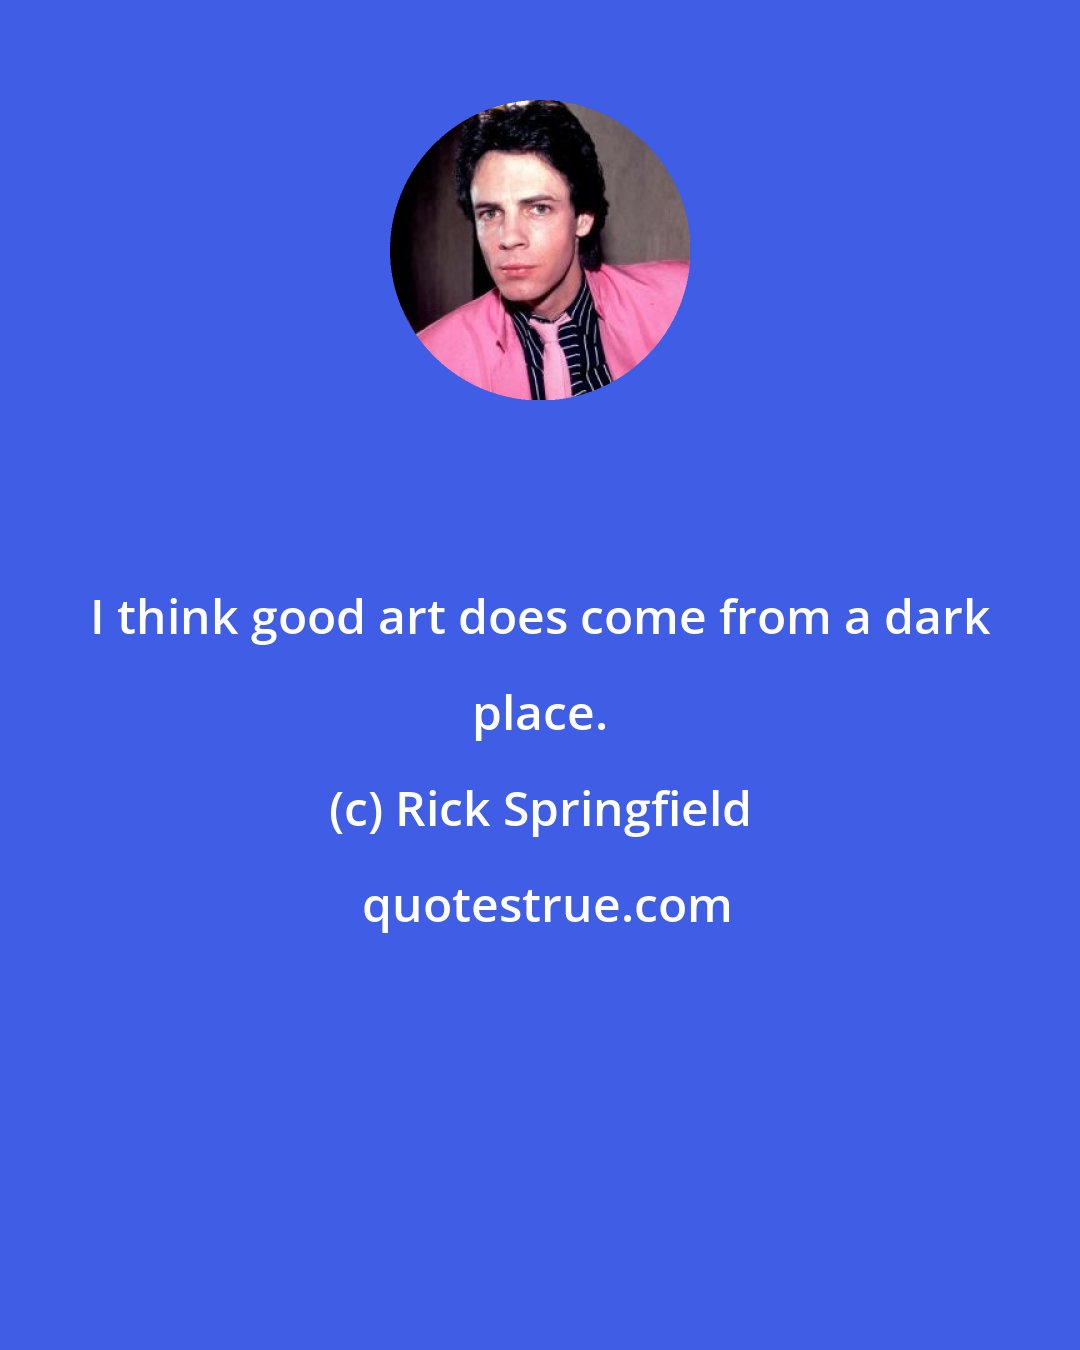 Rick Springfield: I think good art does come from a dark place.